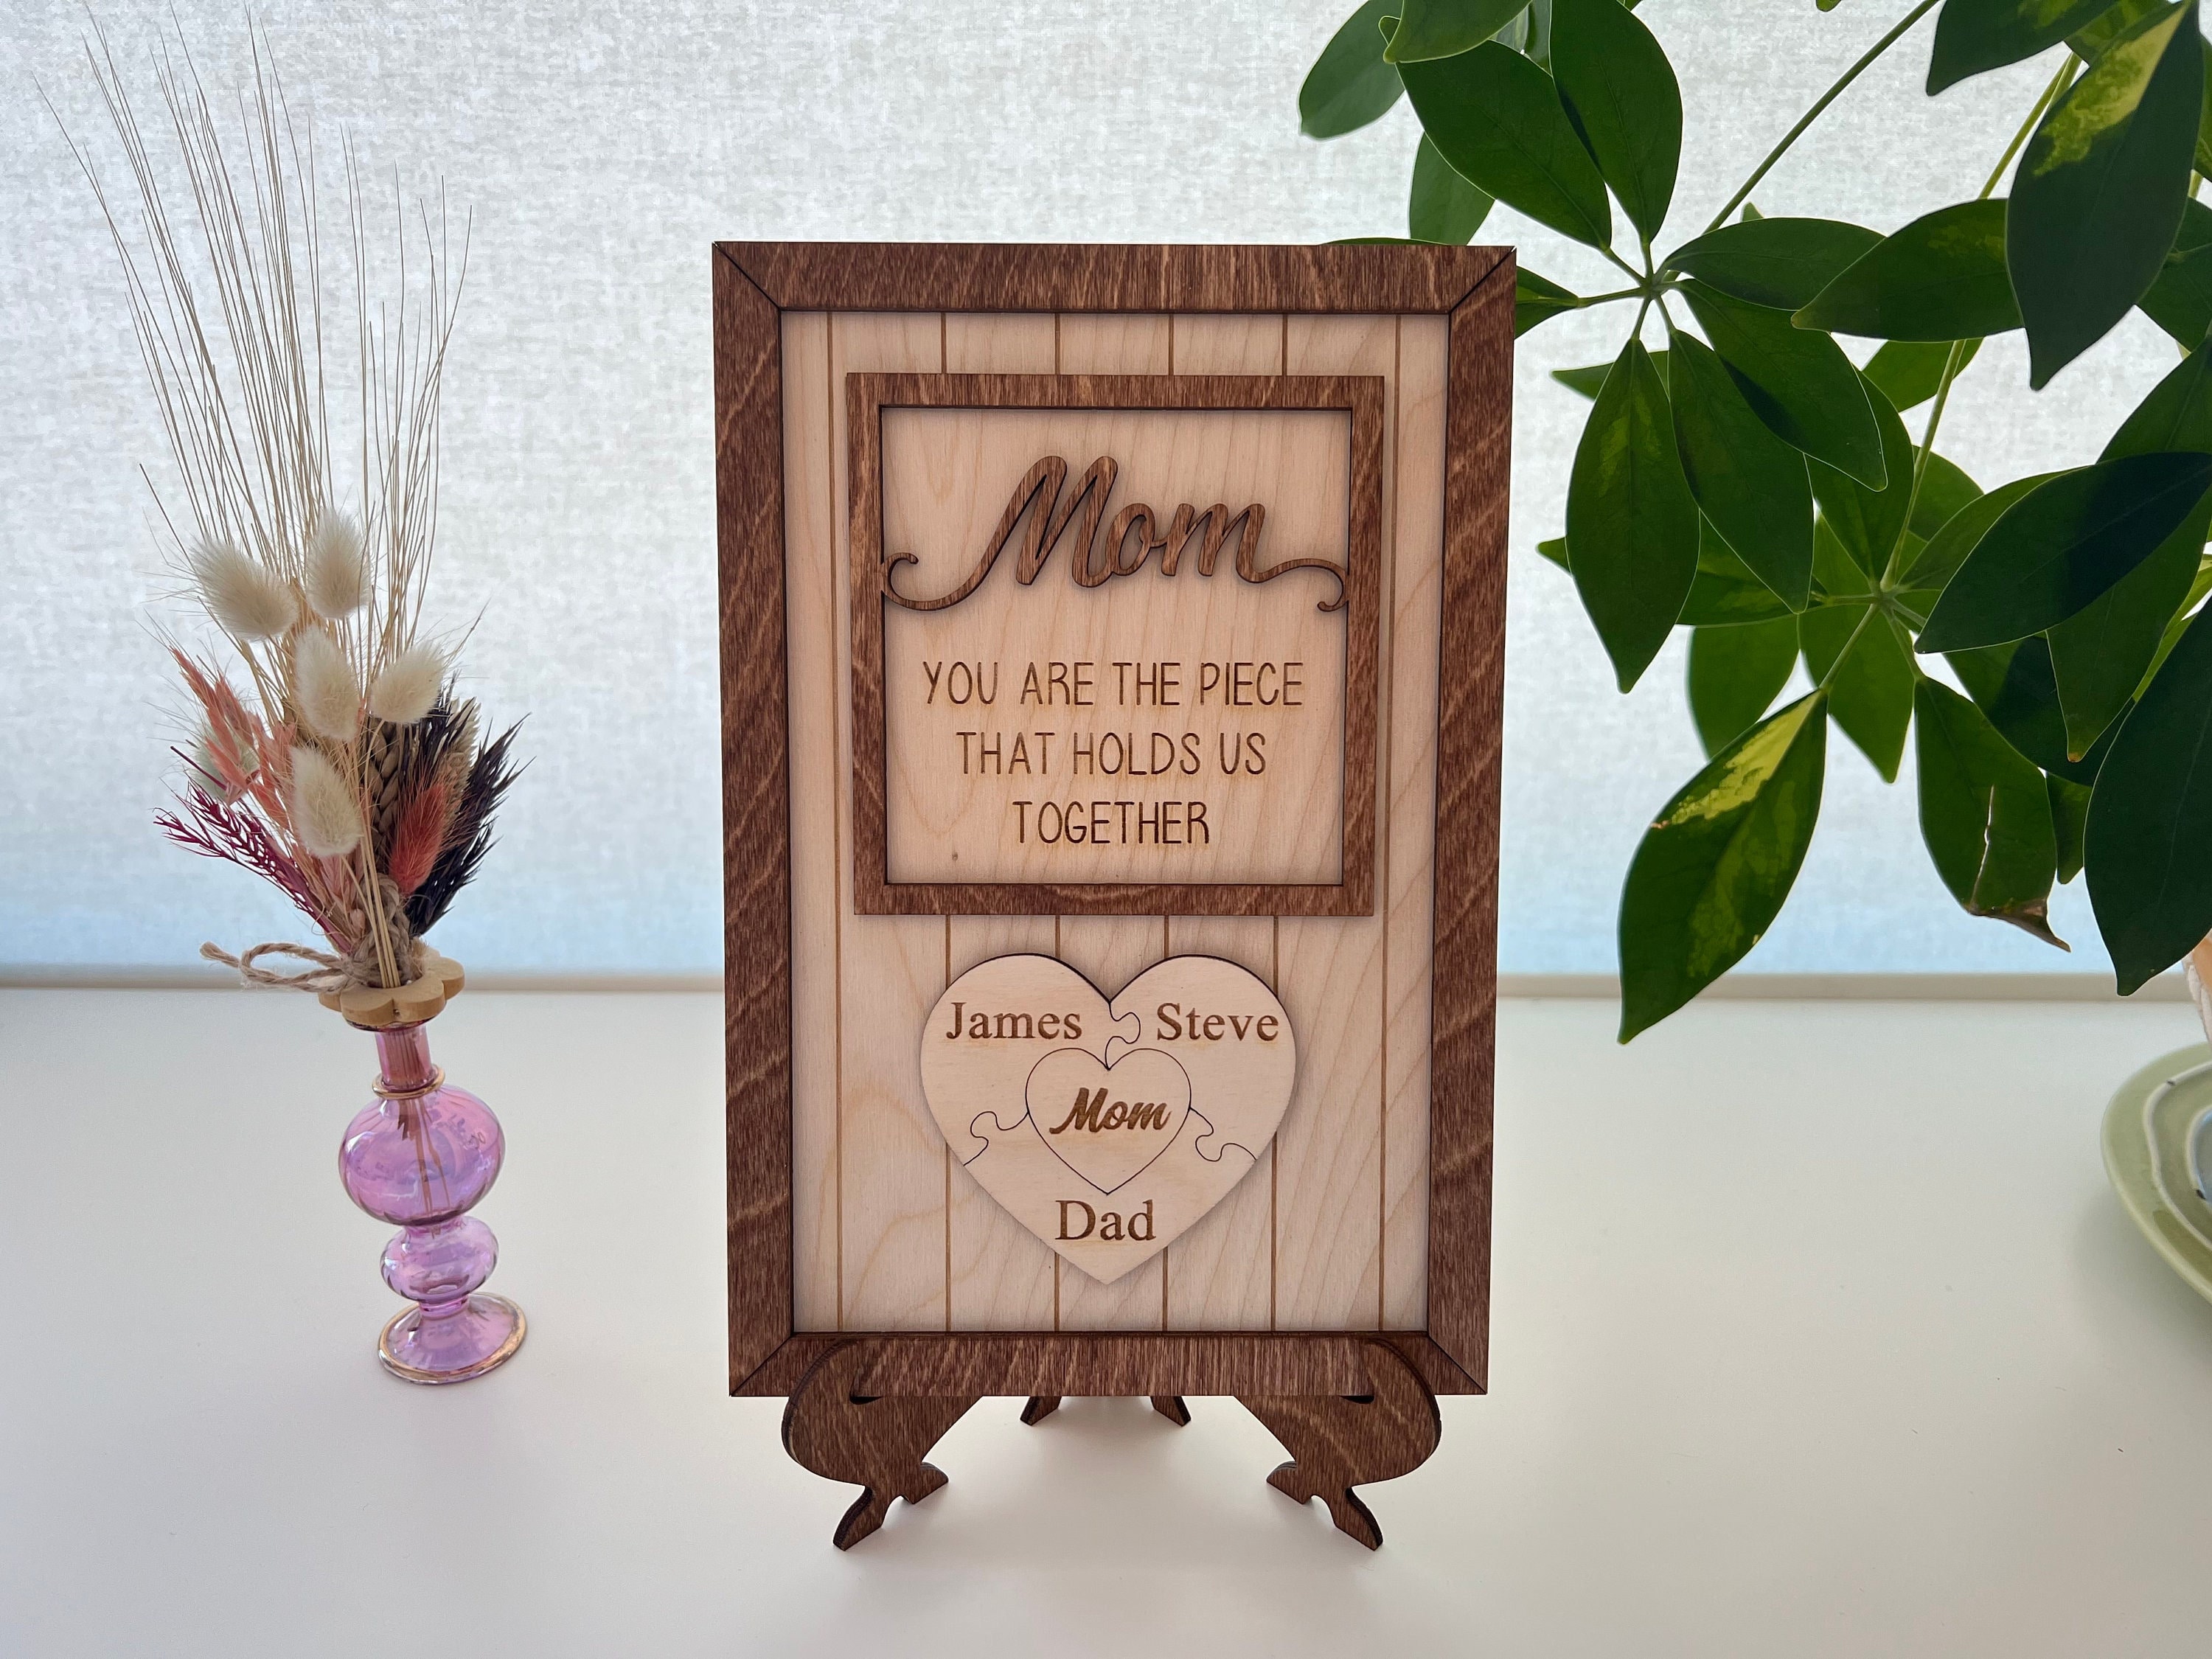 Sentimental Gifts for Mom From Son, Valentines Day Gifts for Mom, Mom Gifts  From Son, Gift for Mom From Son, Mother Birthday Gifts, 01-008 